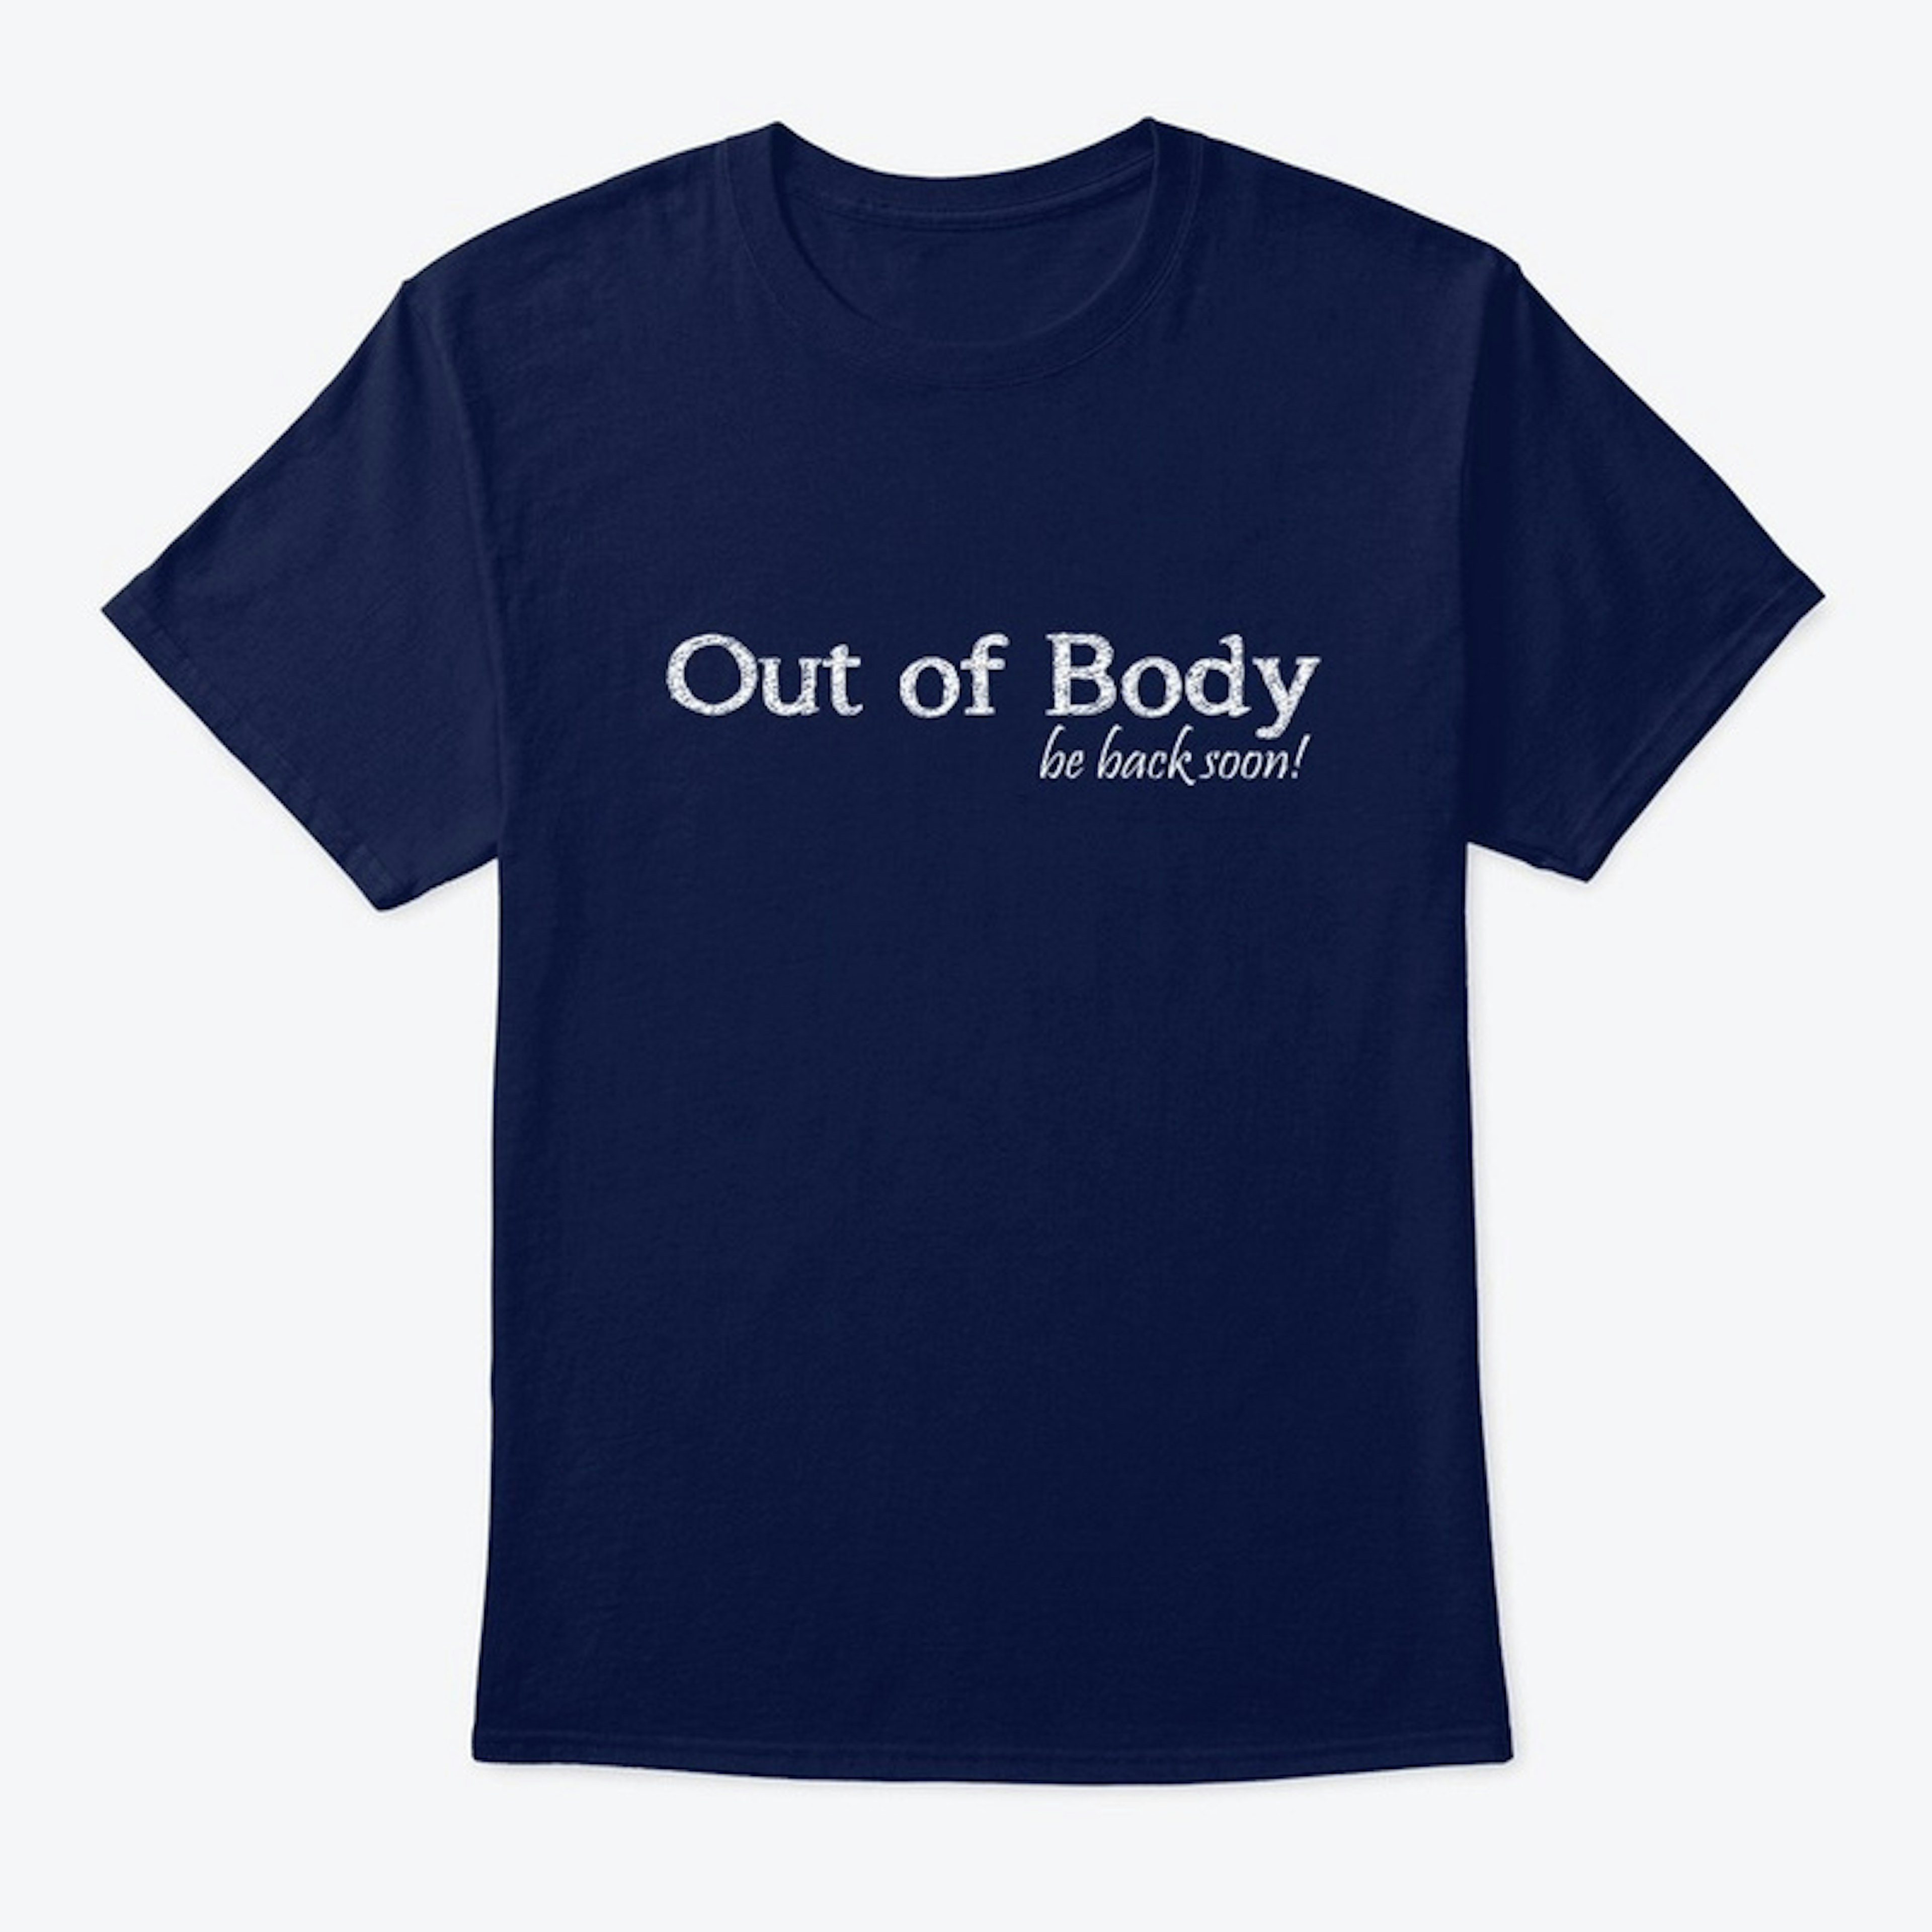 Out of Body - be back soon